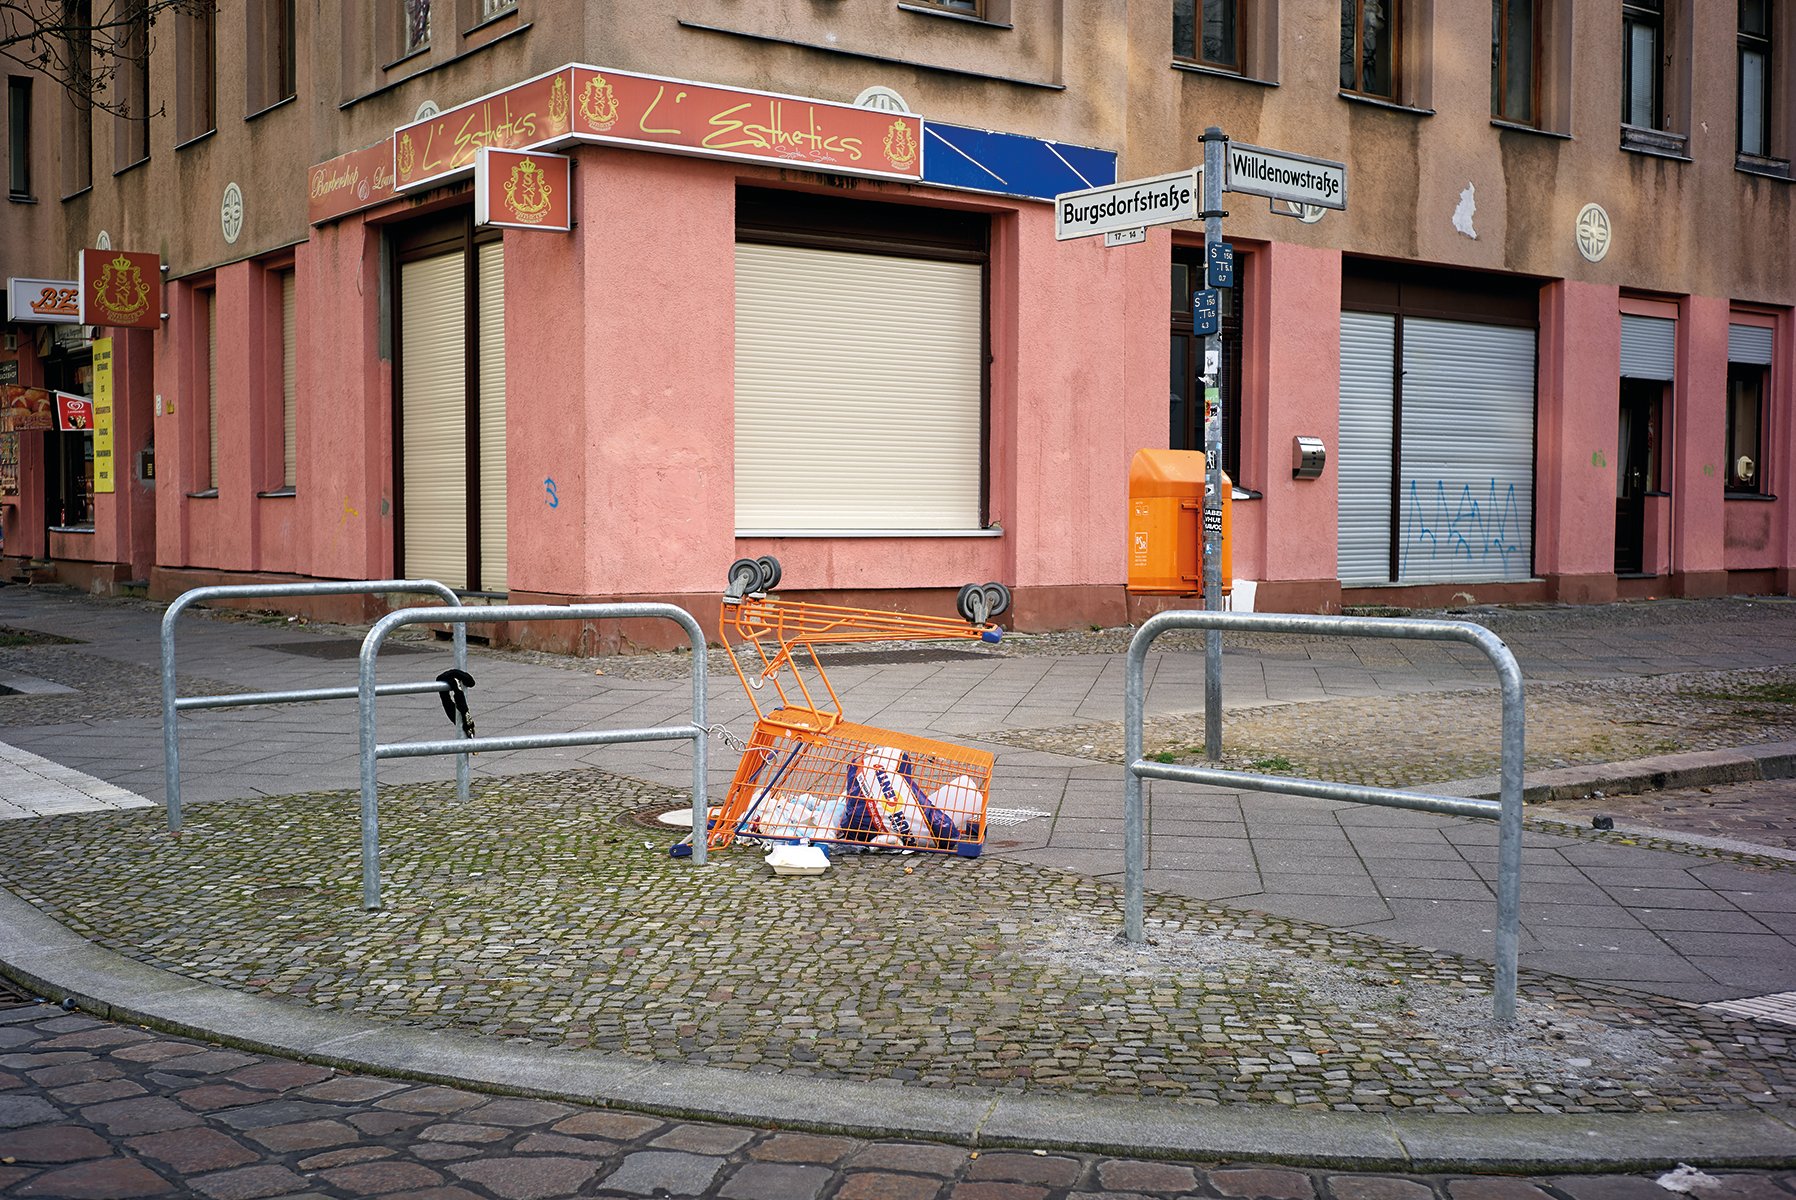 2 empty shopping trollies abandoned on corner of grey brick building with Einkaufswagen Luca Ellena in white font on coral banner to left side